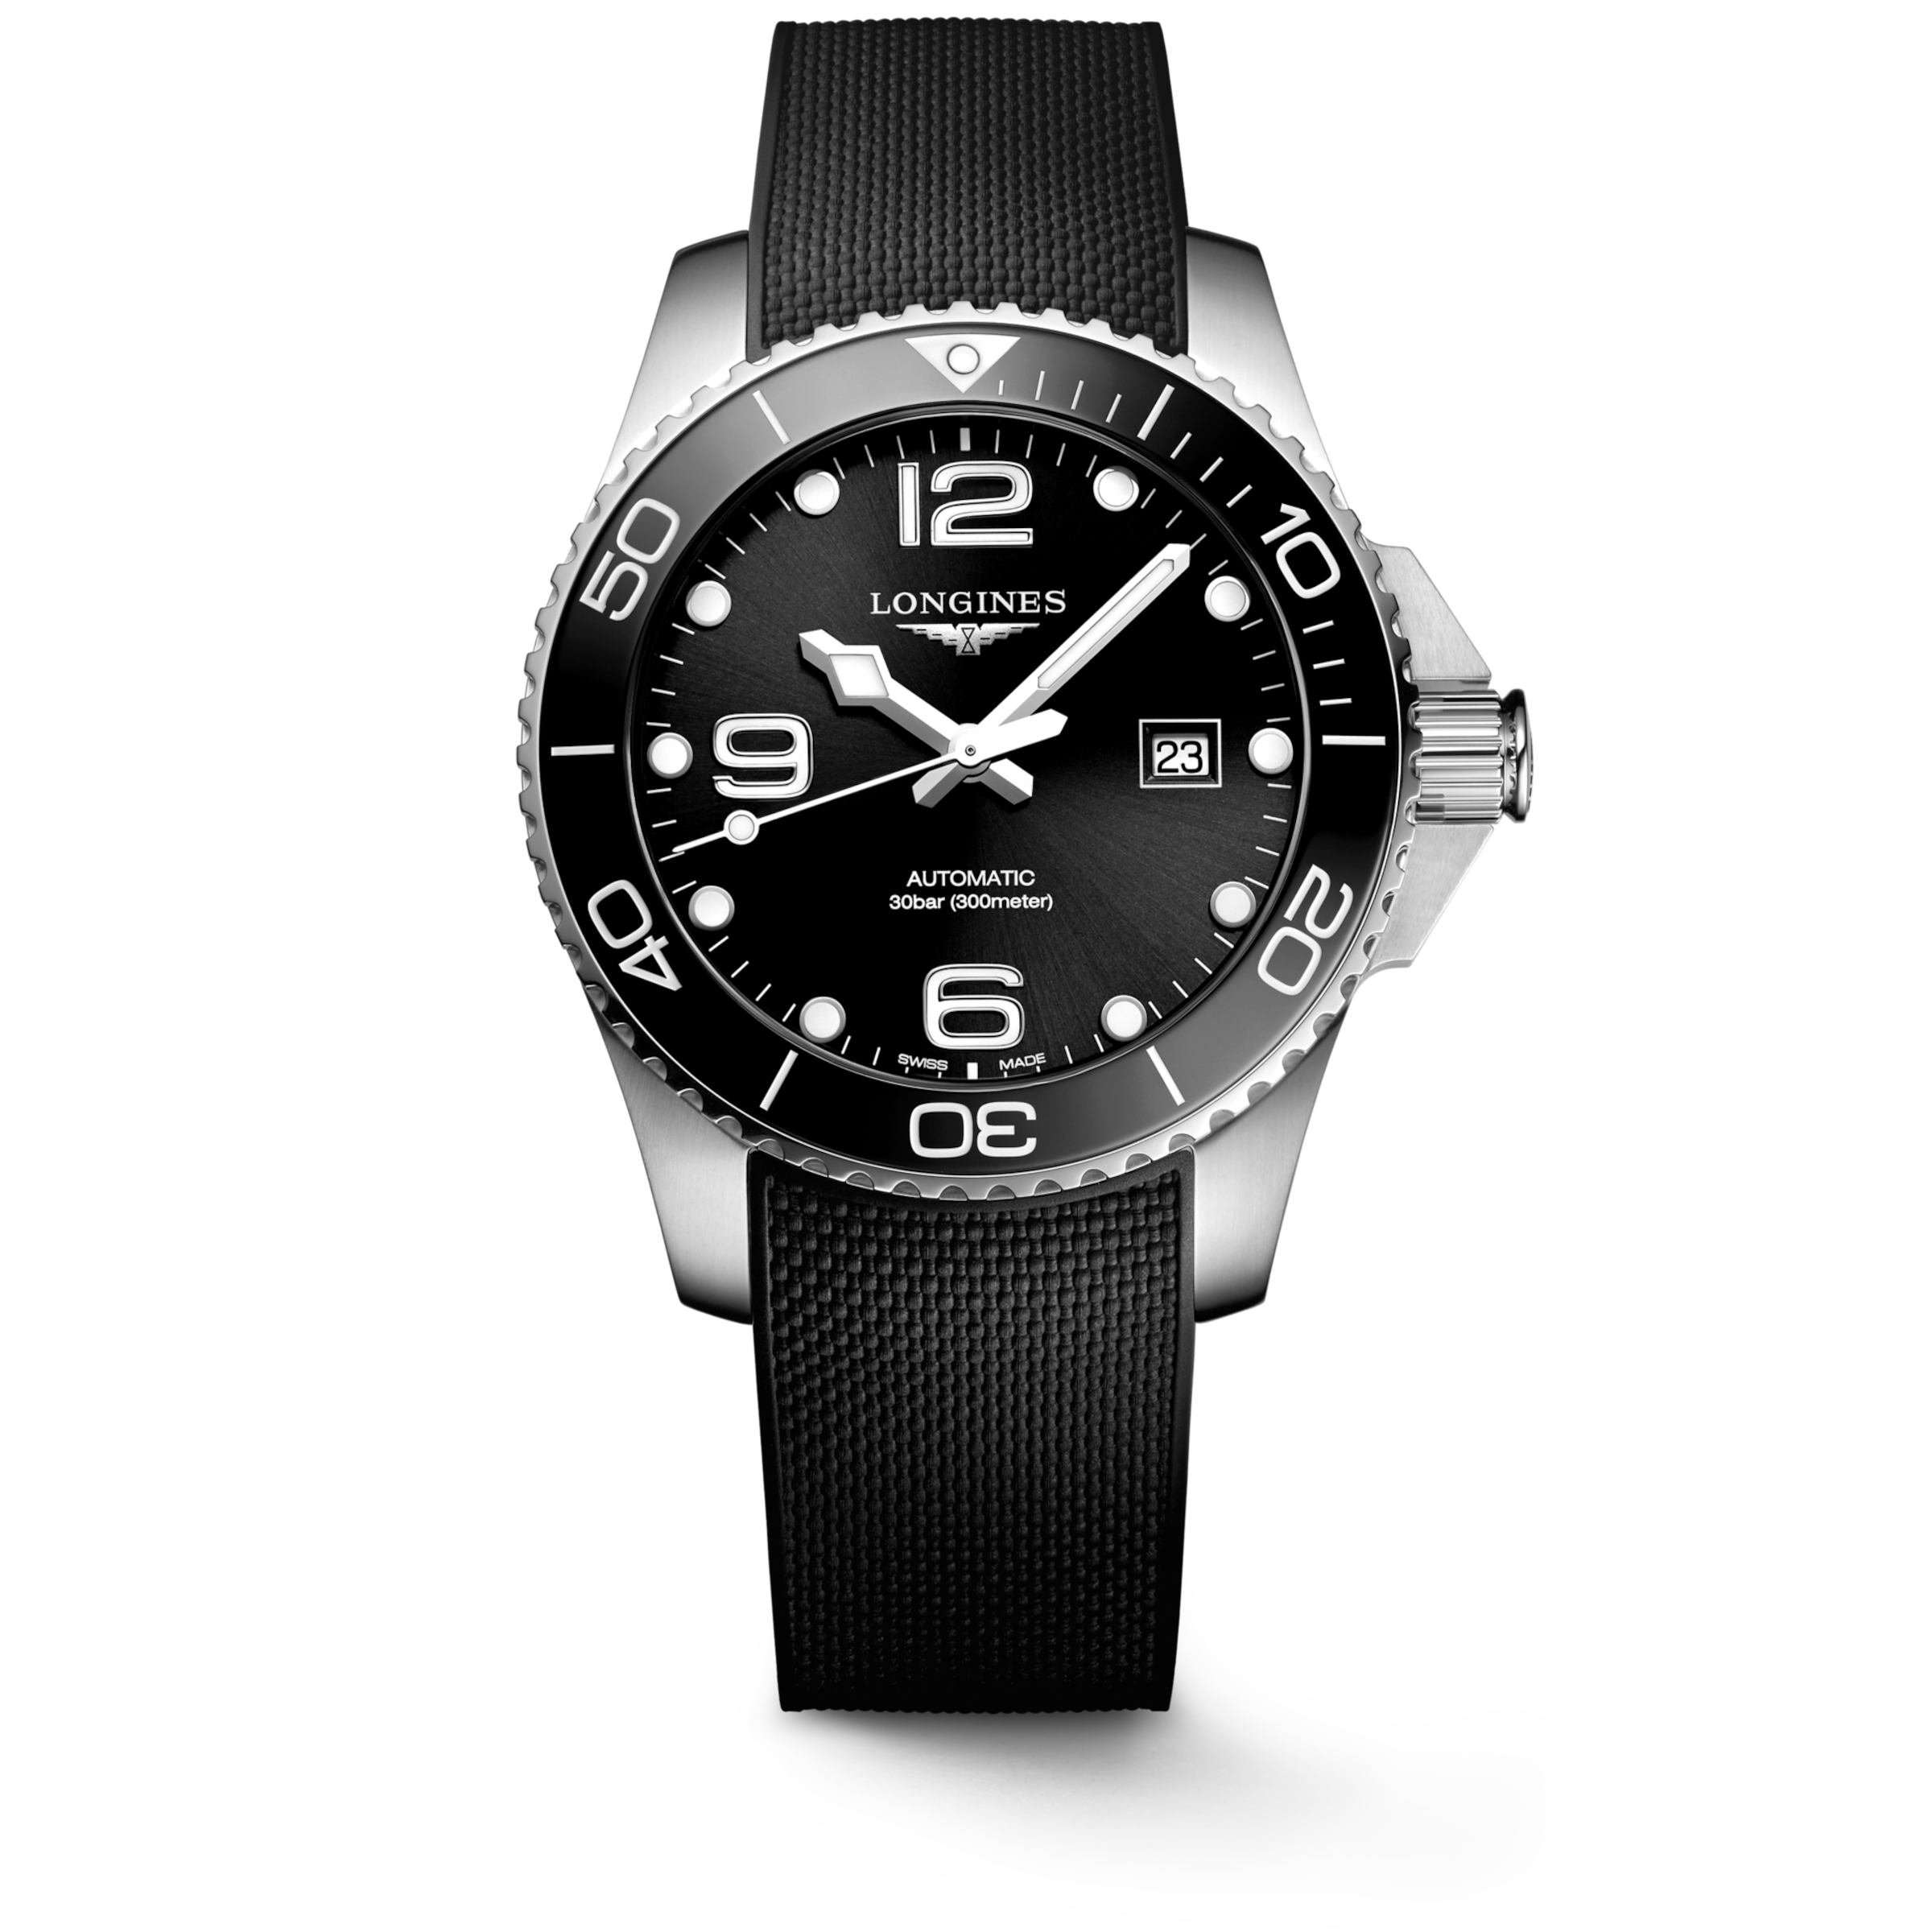 Longines HYDROCONQUEST Automatic Stainless steel and ceramic bezel Watch - L3.782.4.56.9